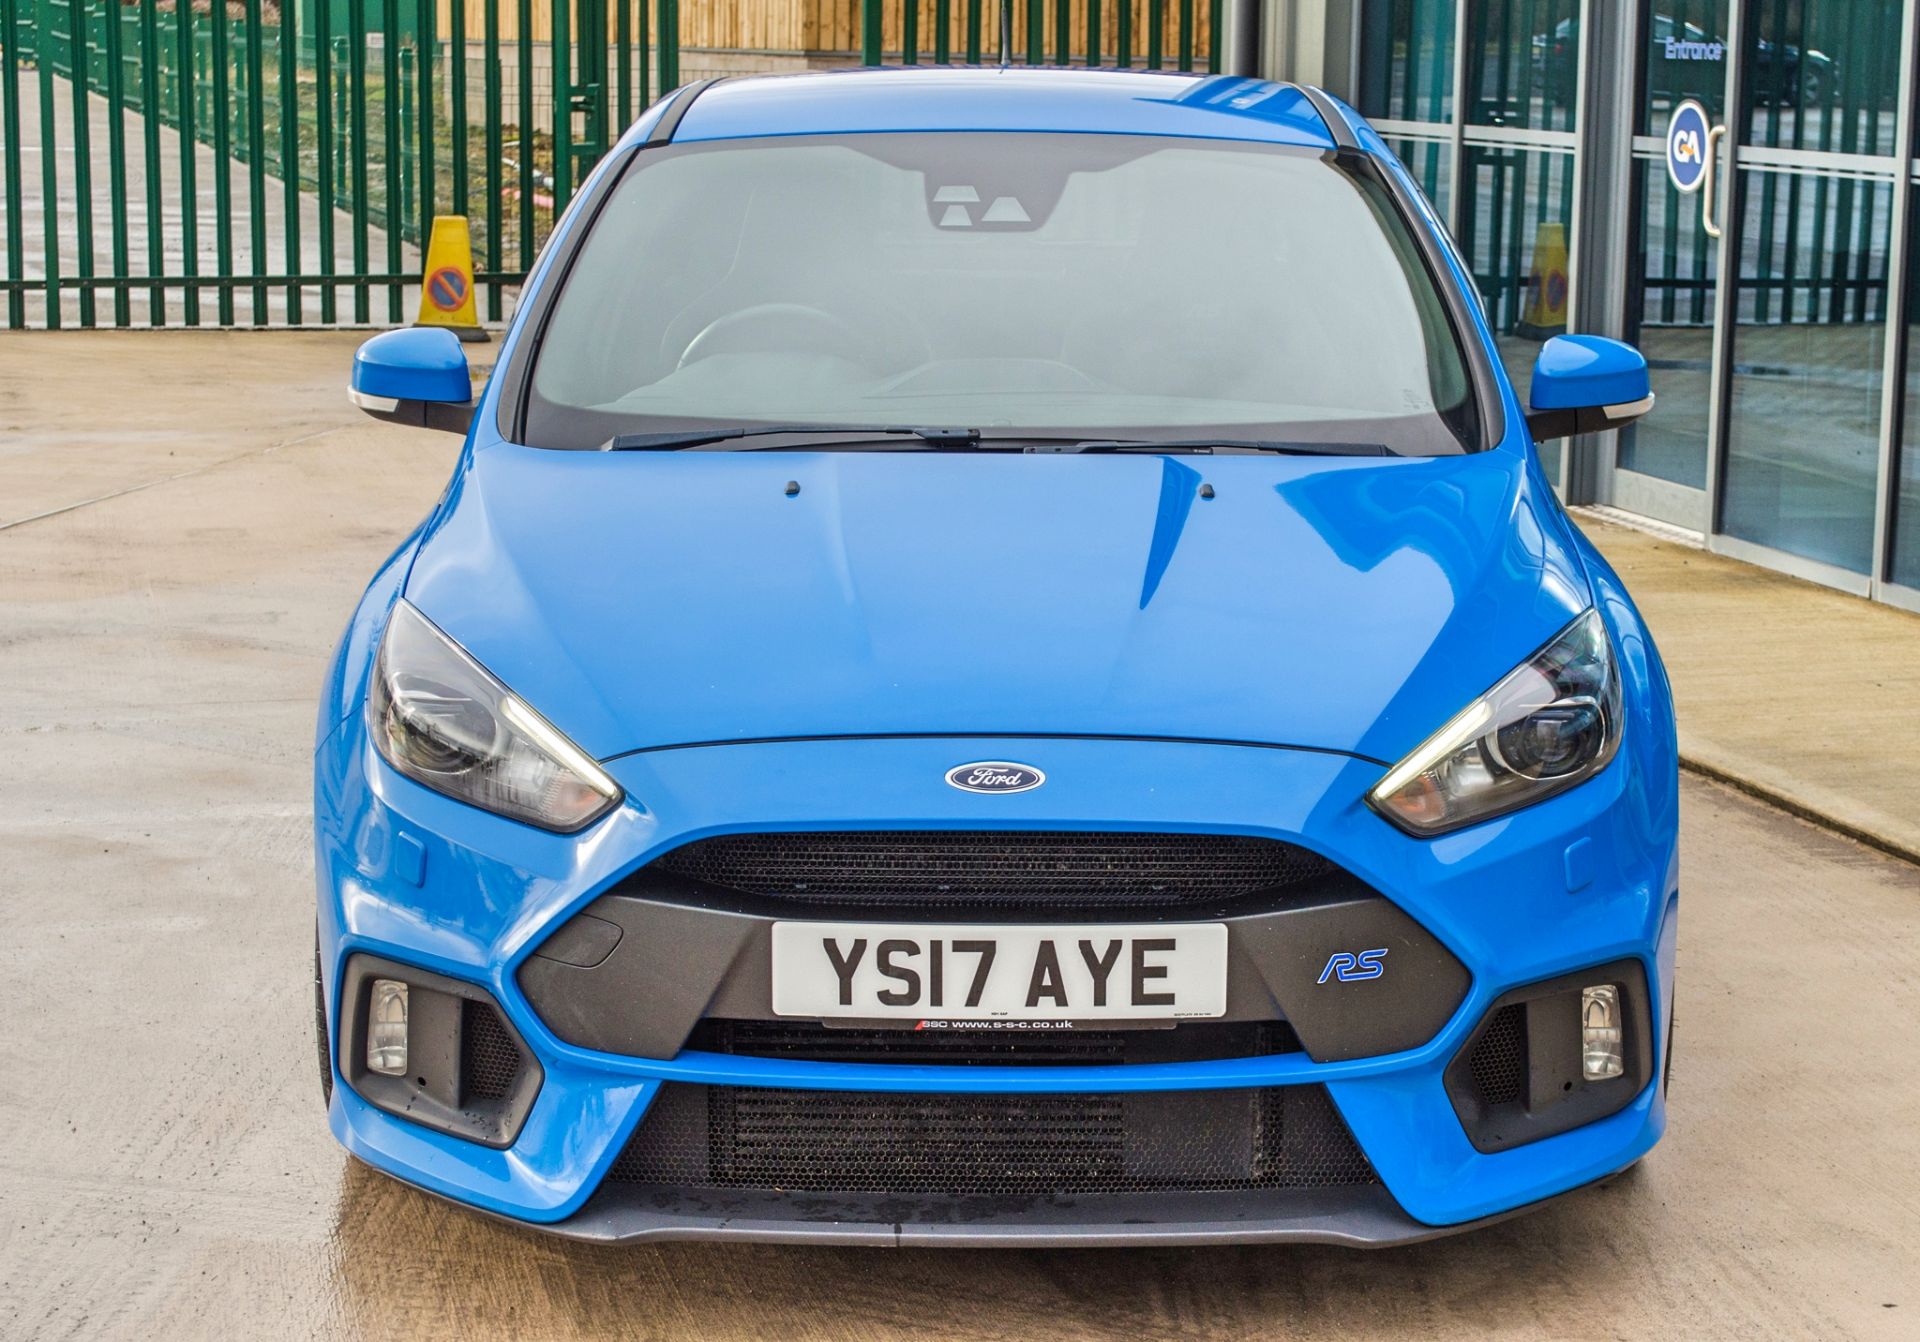 2017 Ford Focus 2.3 RS 5 door hatch back - Image 10 of 56